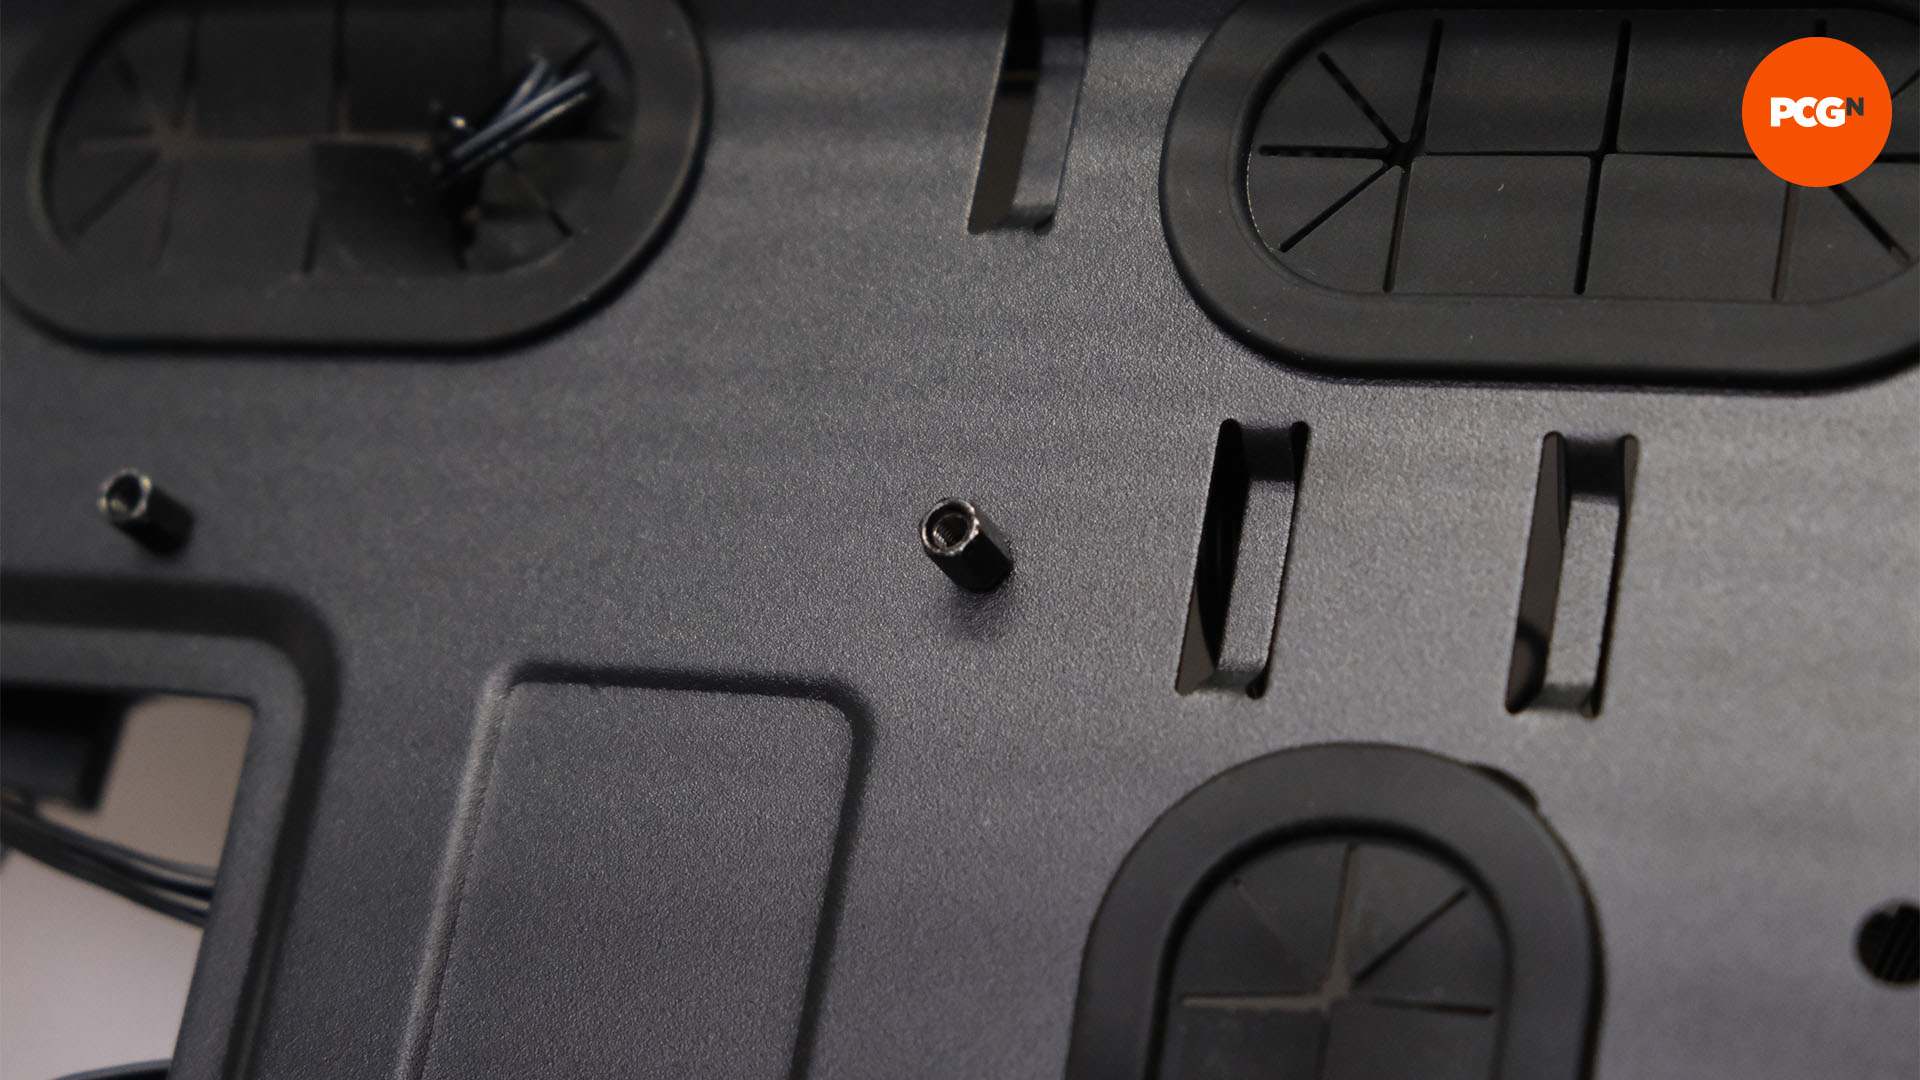 How to build a gaming PC: Motherboard standoffs in case